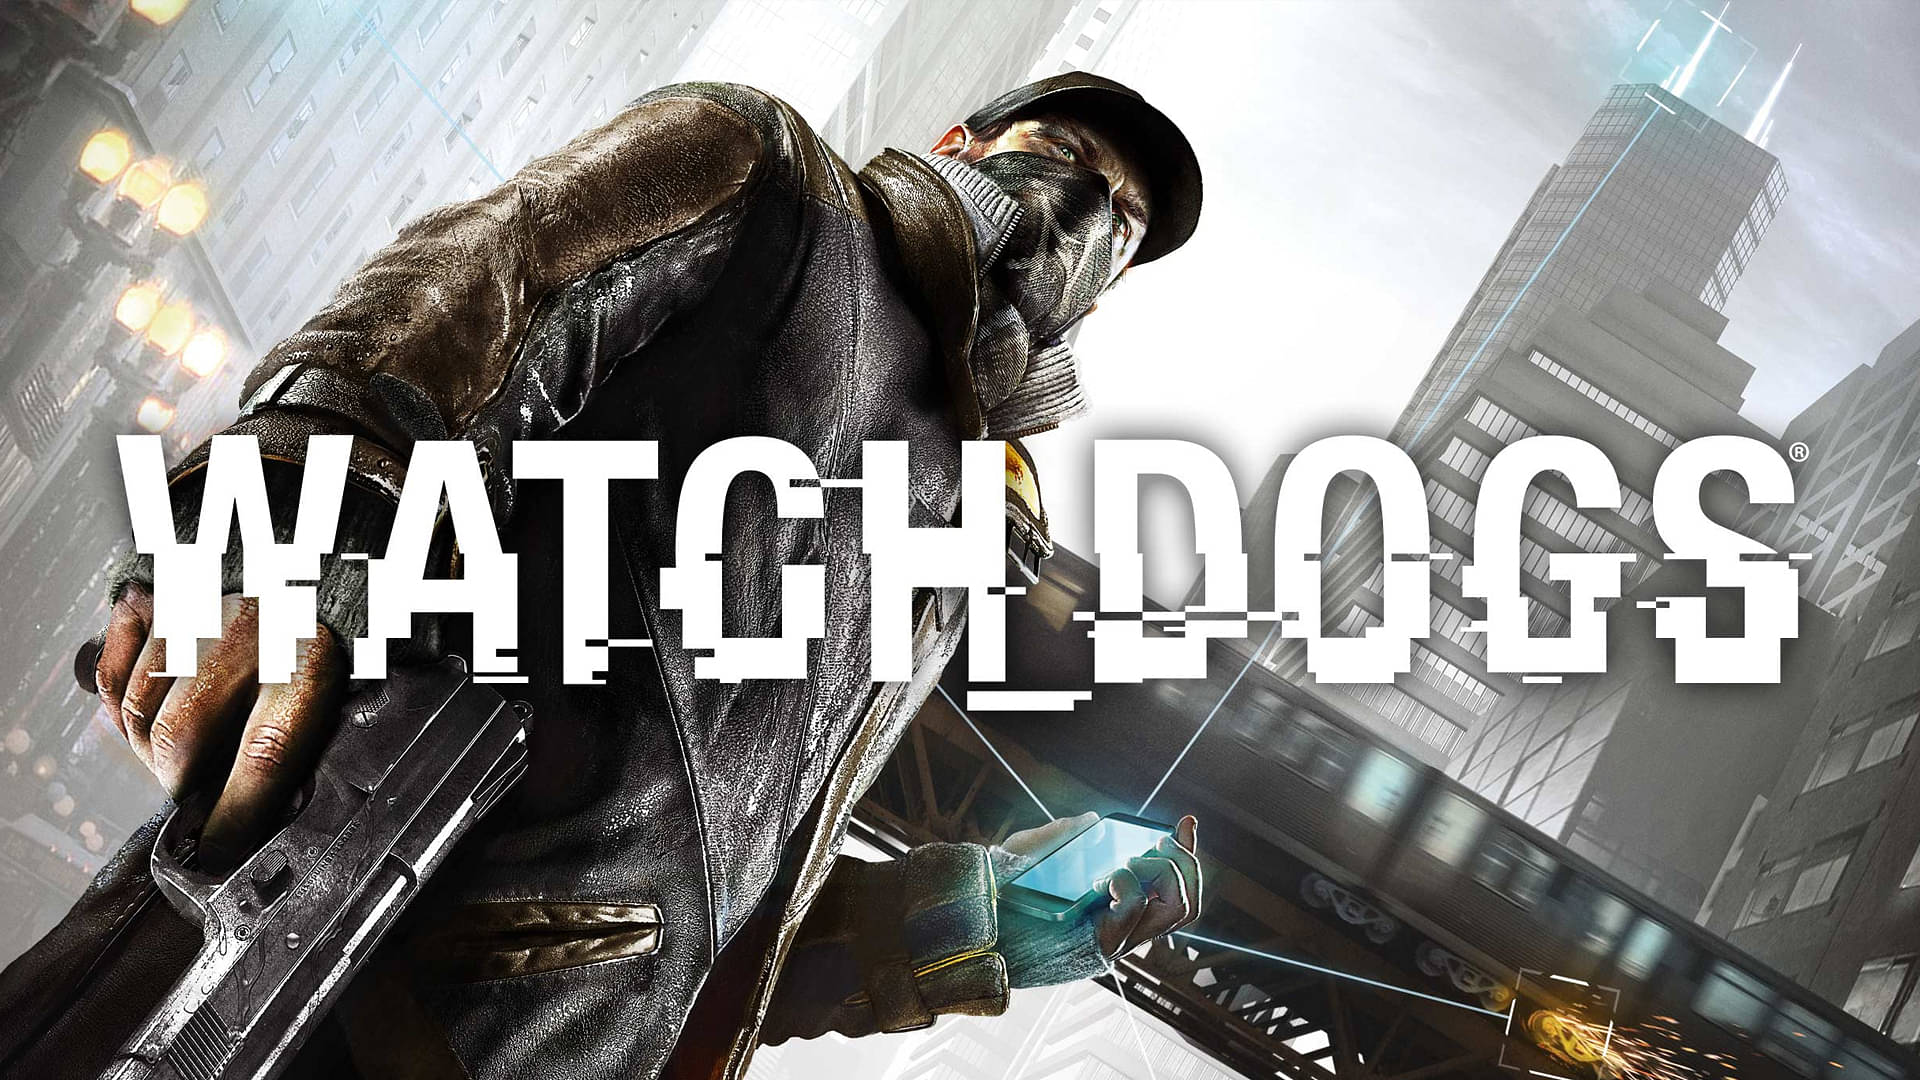 An image showing the main cover of Watch Dogs which is available on Steam